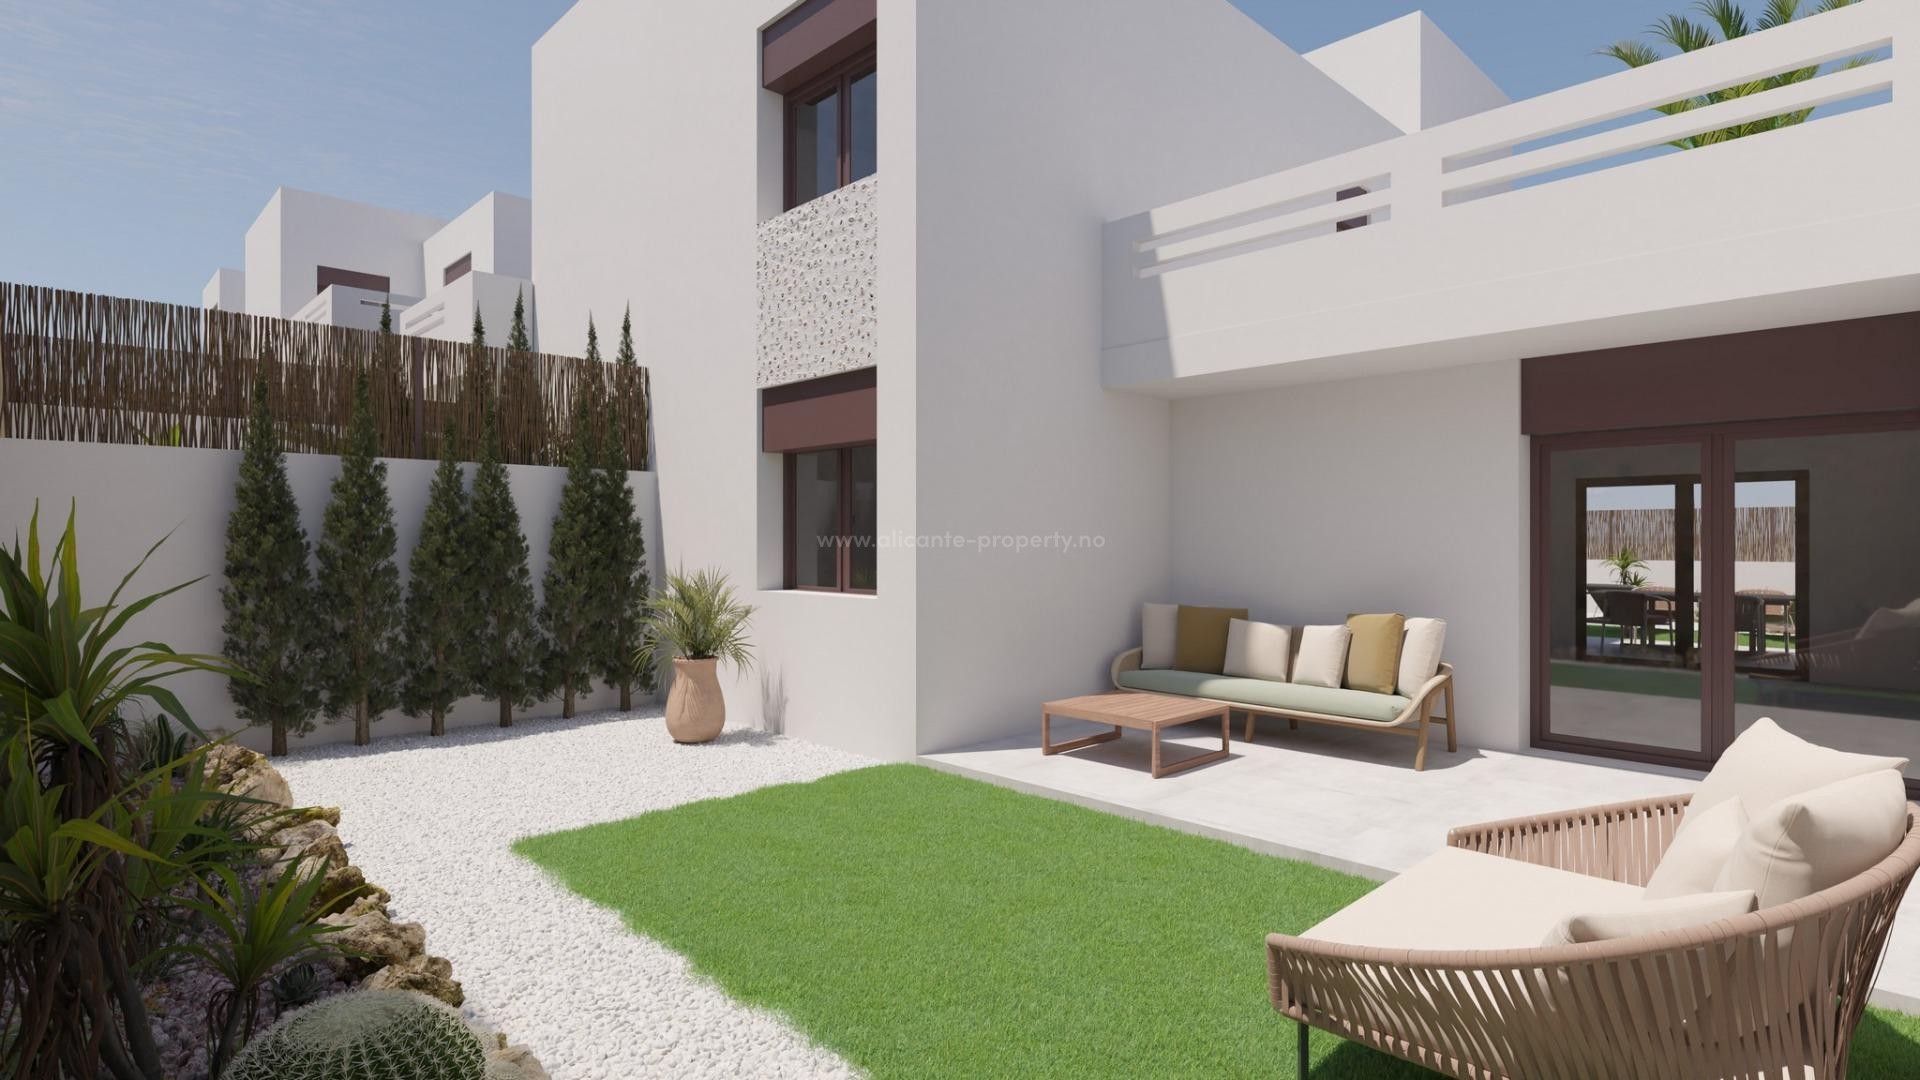 Different types of new bungalows, apartments and townhouses in La Finca Golf, 2 bedrooms and 2 bathrooms, vary with garden, terrace, solarium. Shared pool